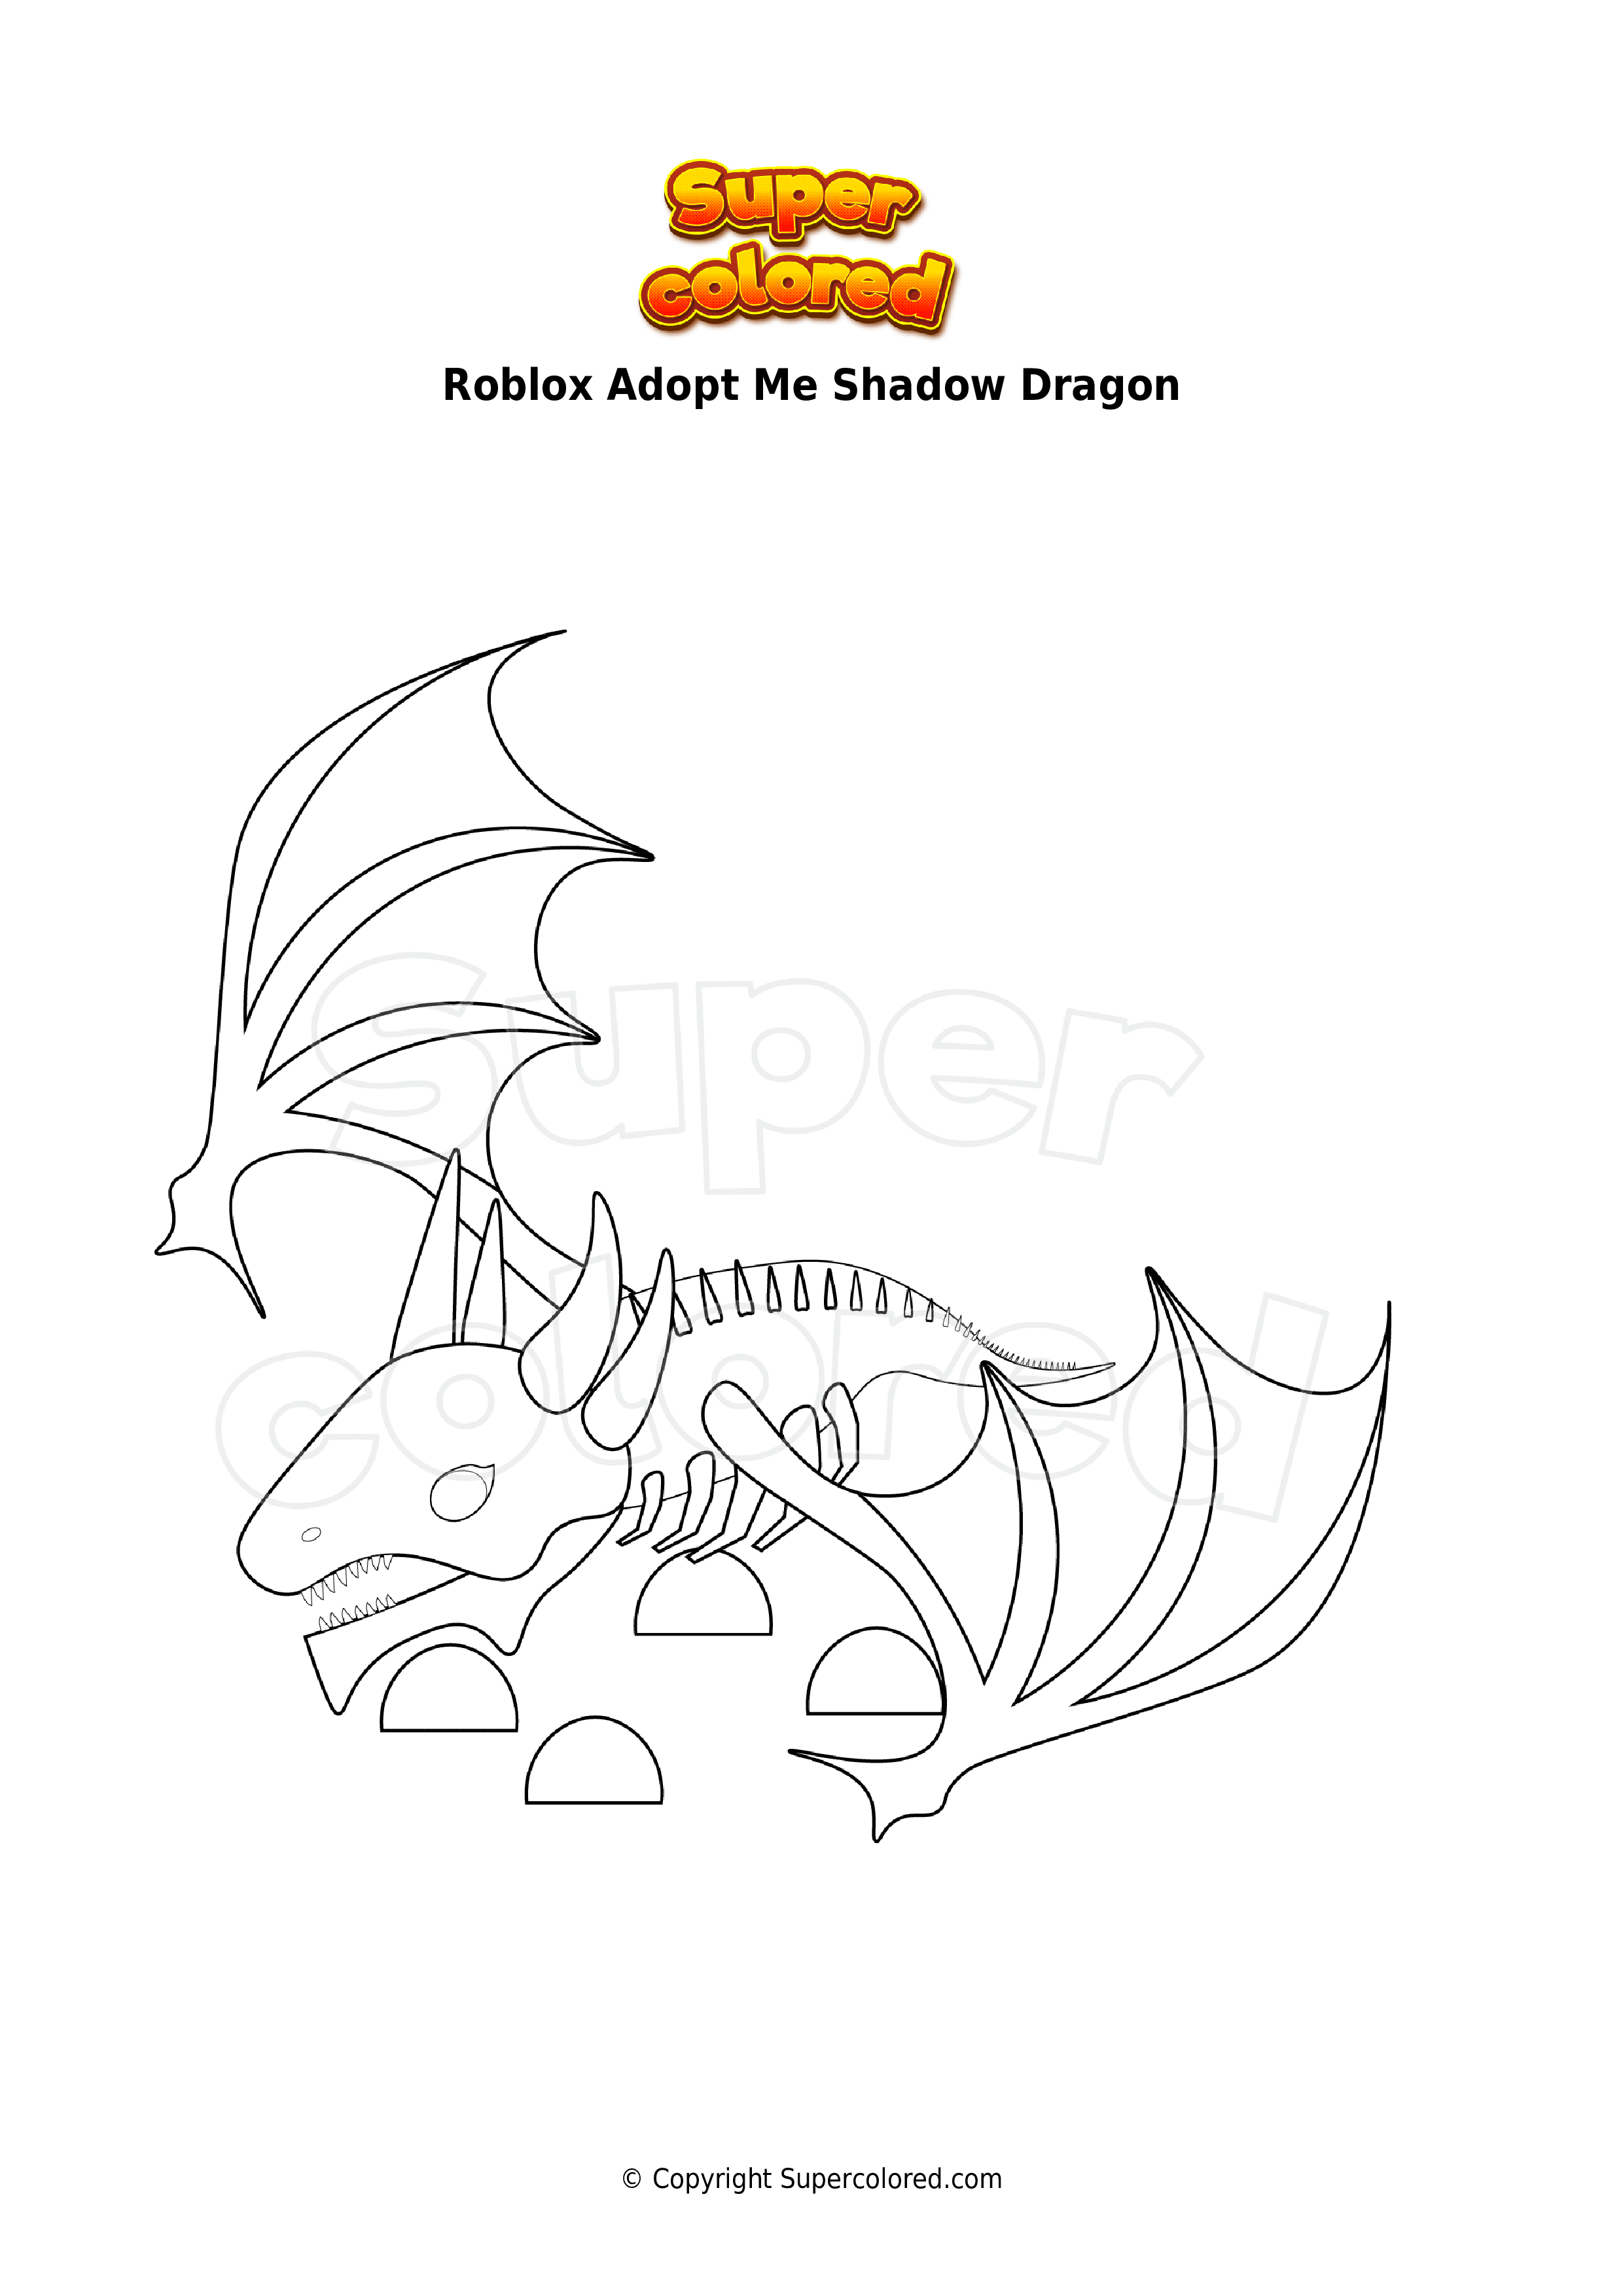 Coloring Pages Roblox Adopt Me Supercolored - roblox adopt me giraffe coloring pages